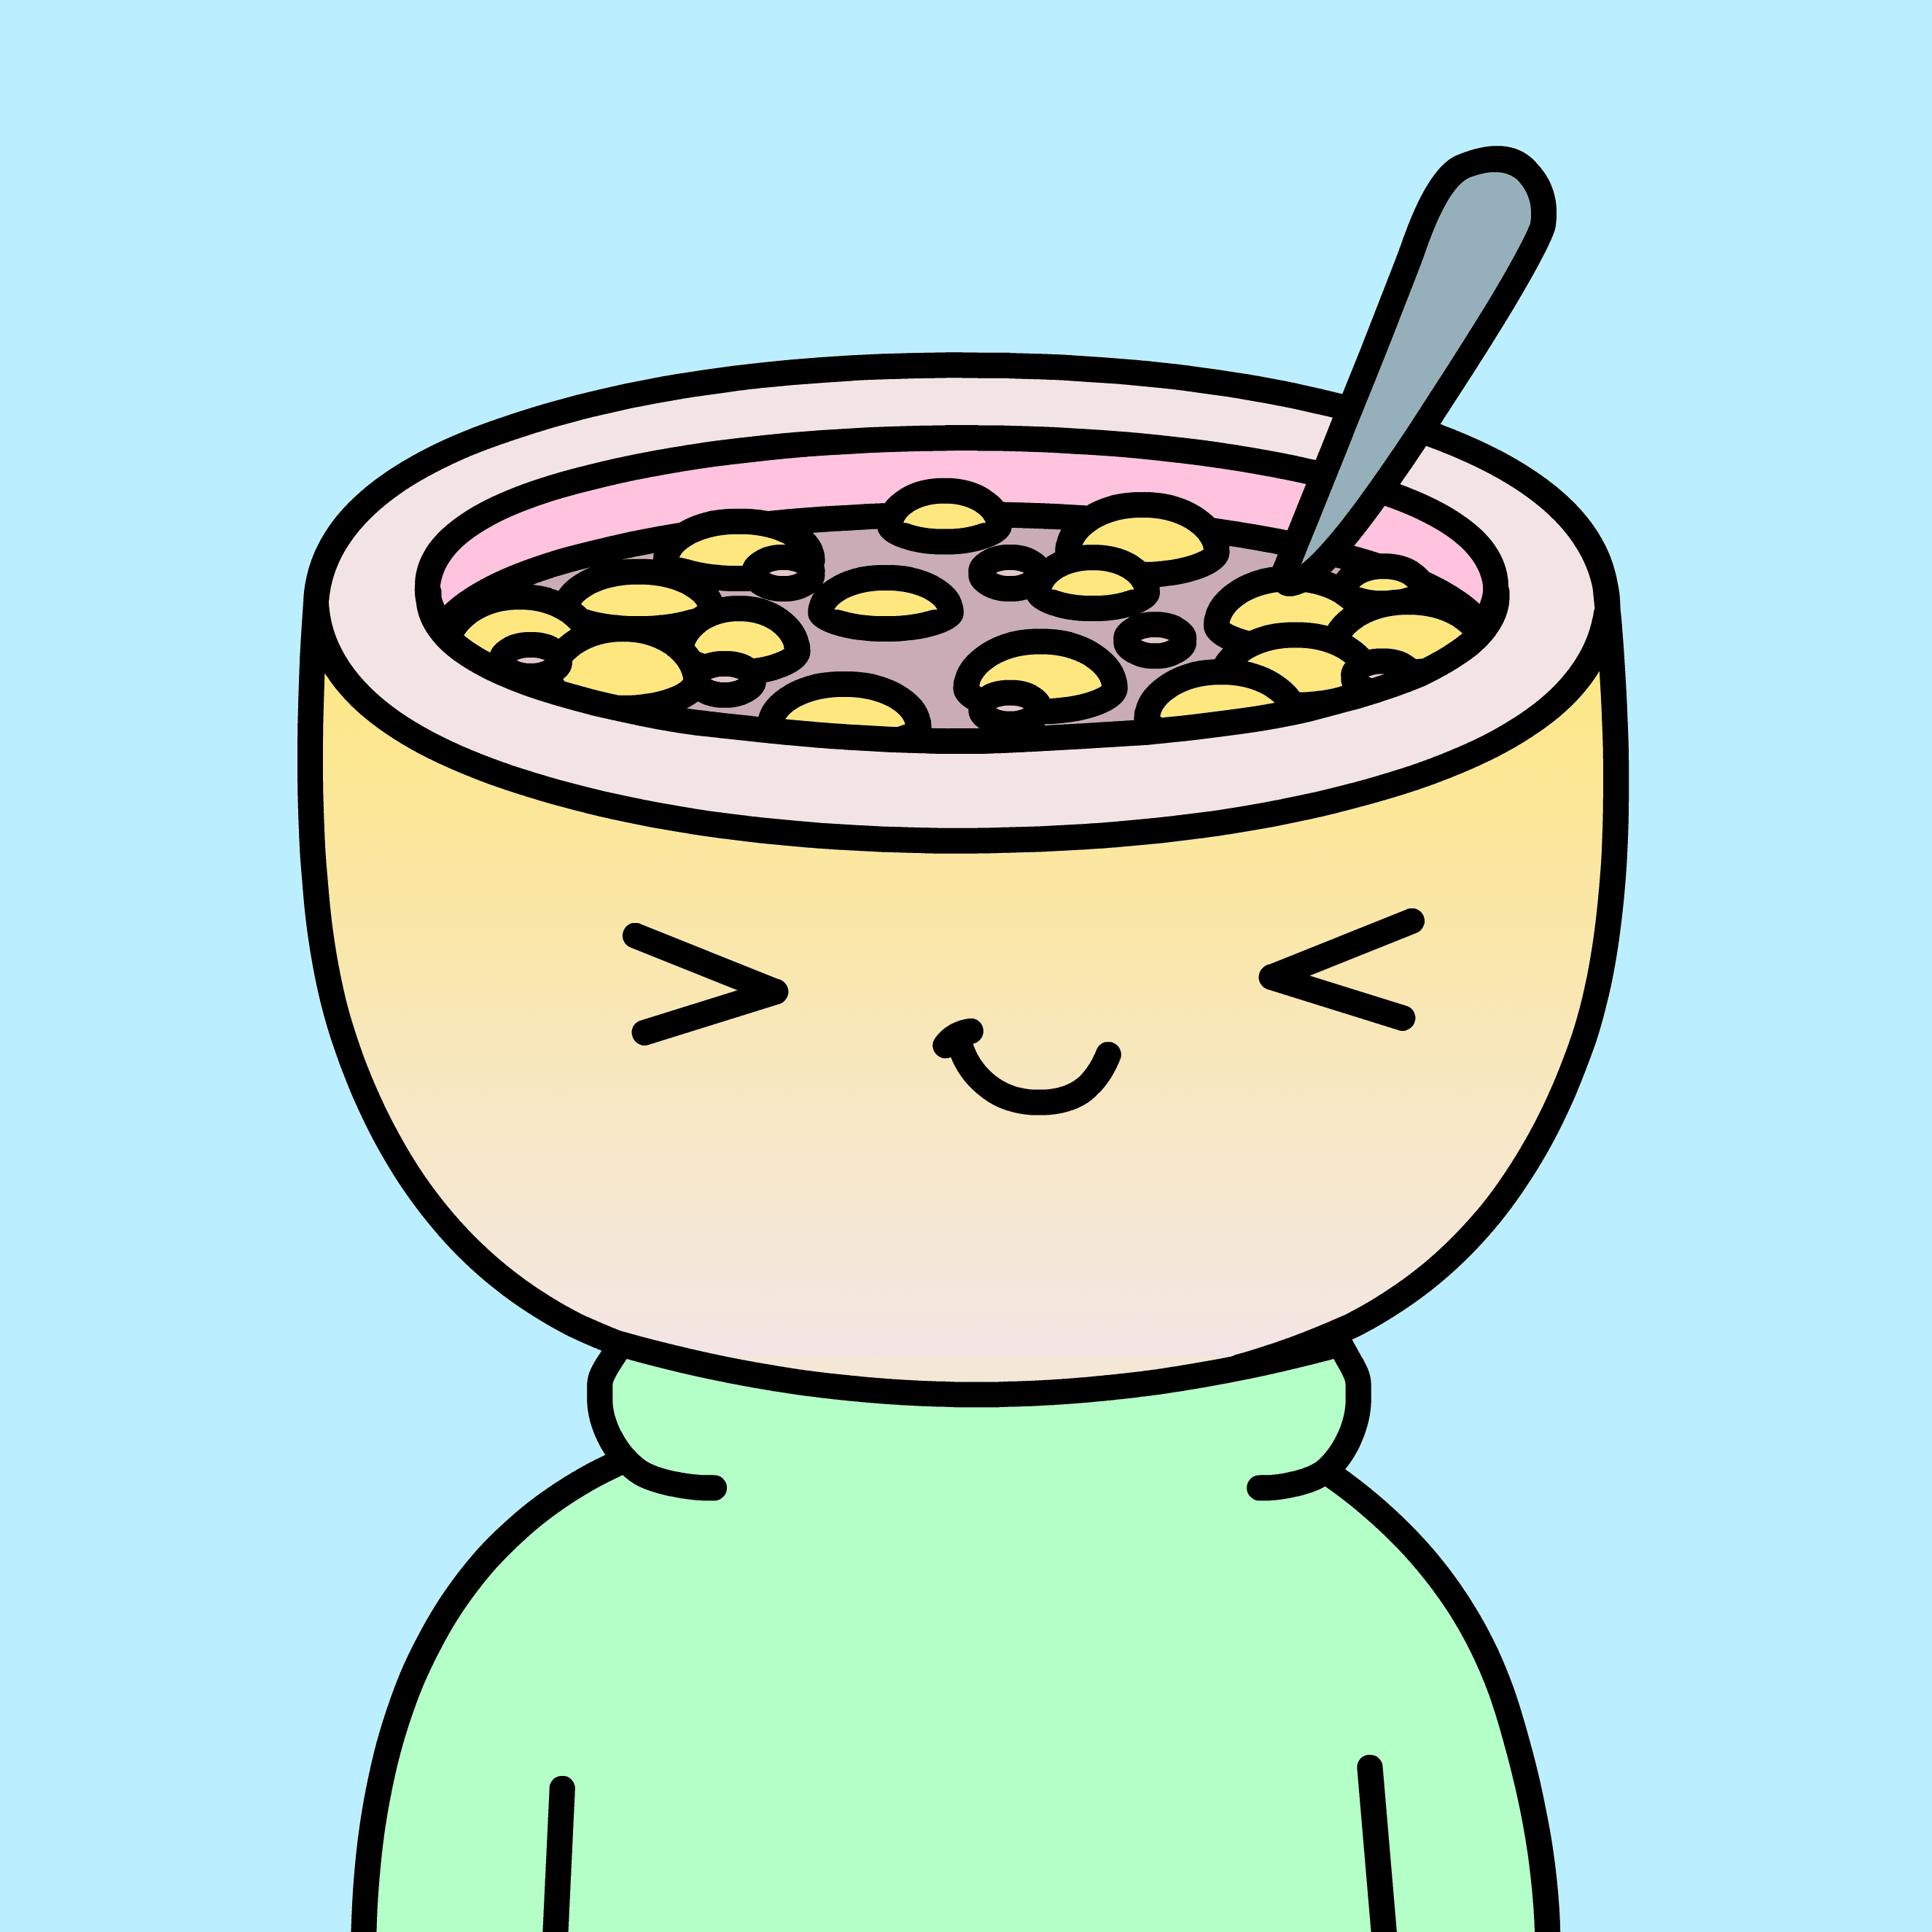 CEREAL #7209